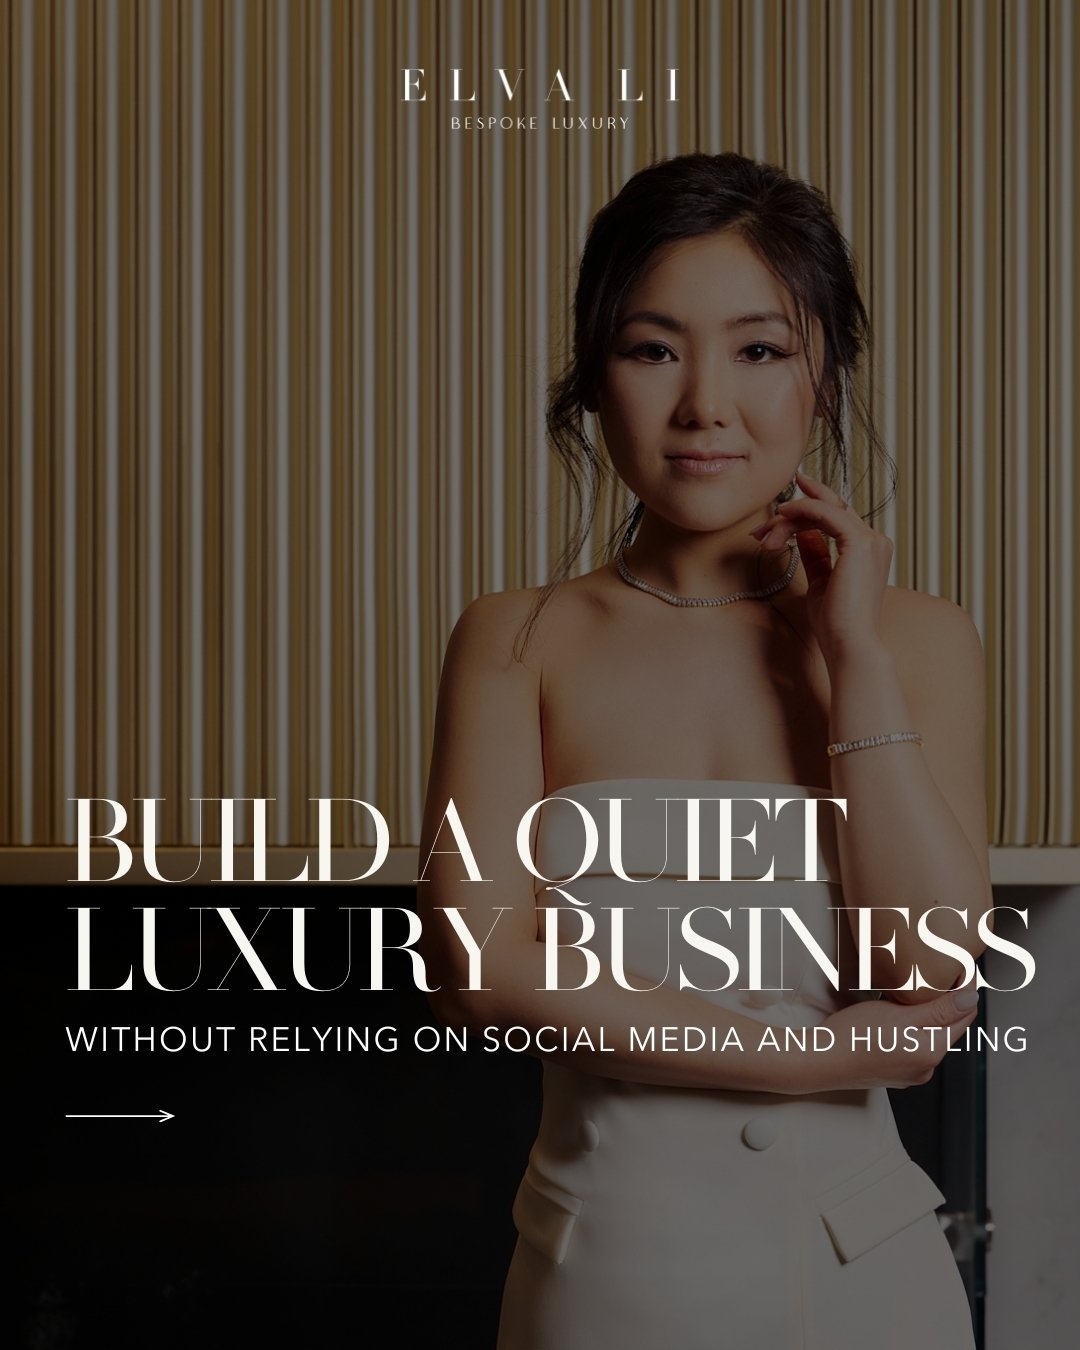 What is the luxury vision you had when you started your business?

When I started my business, the flame of my passion blazed so intensely, it could have sparked a wildfire. However, as time passed, my vision gradually yielded to the challenges and b